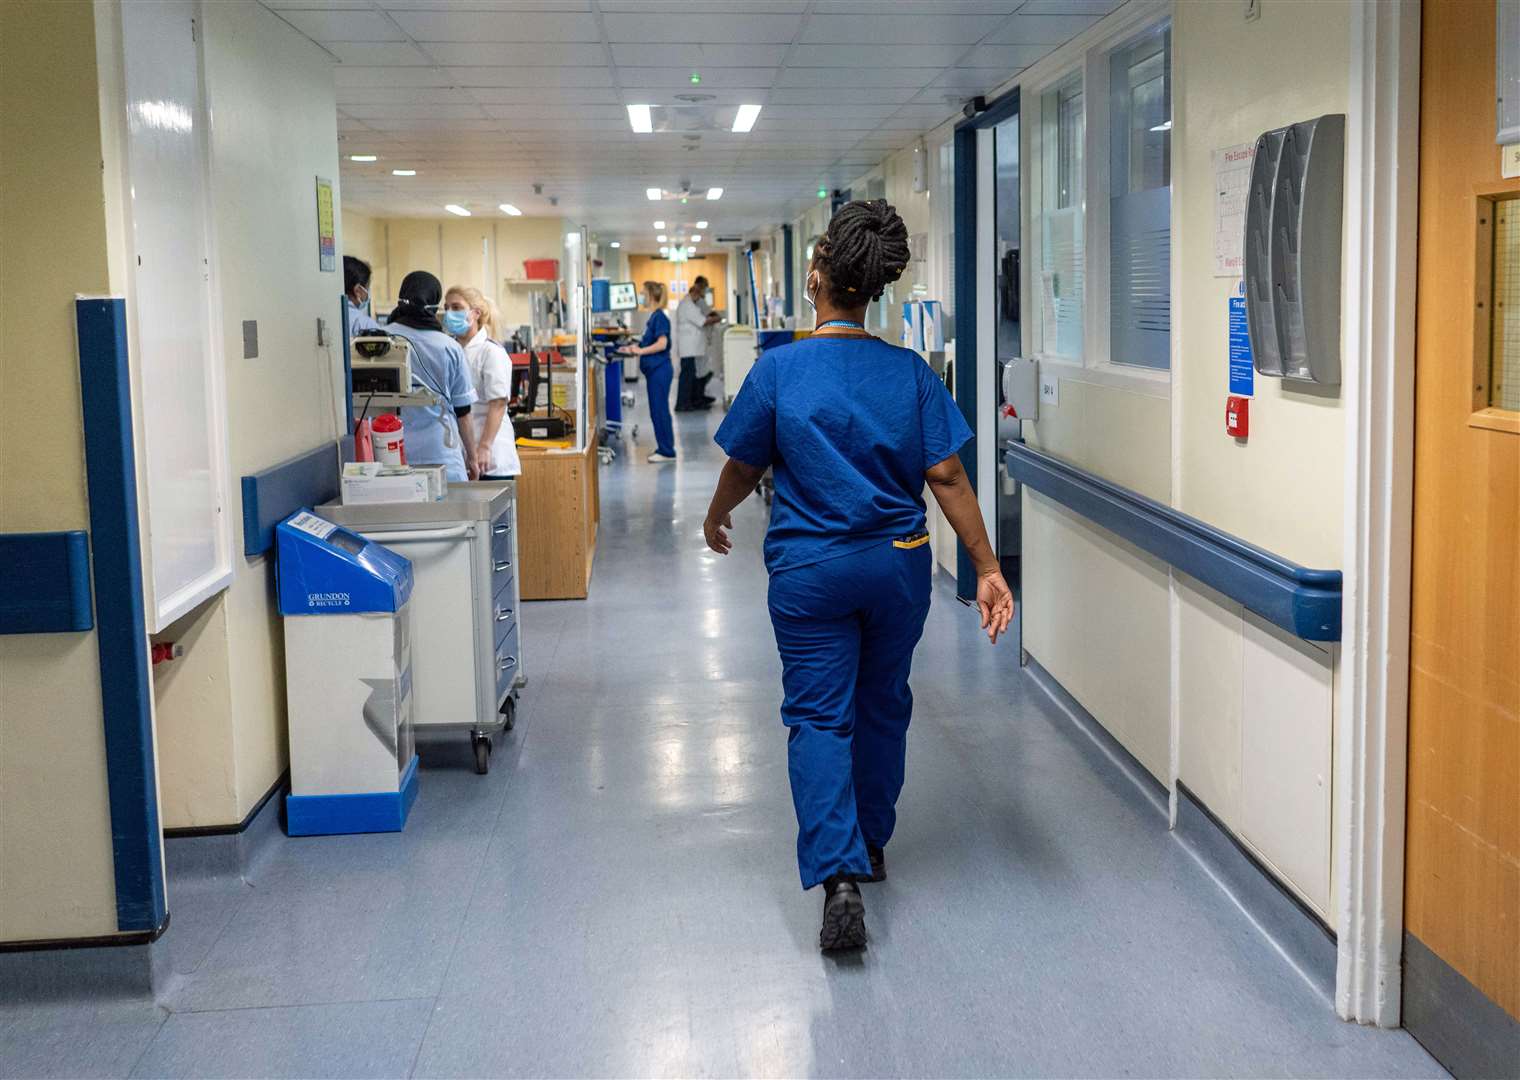 £11.5 billion was spent outsourcing health services from the NHS to the private sector from 2014 to 2020, research suggests (Jeff Moore/PA)